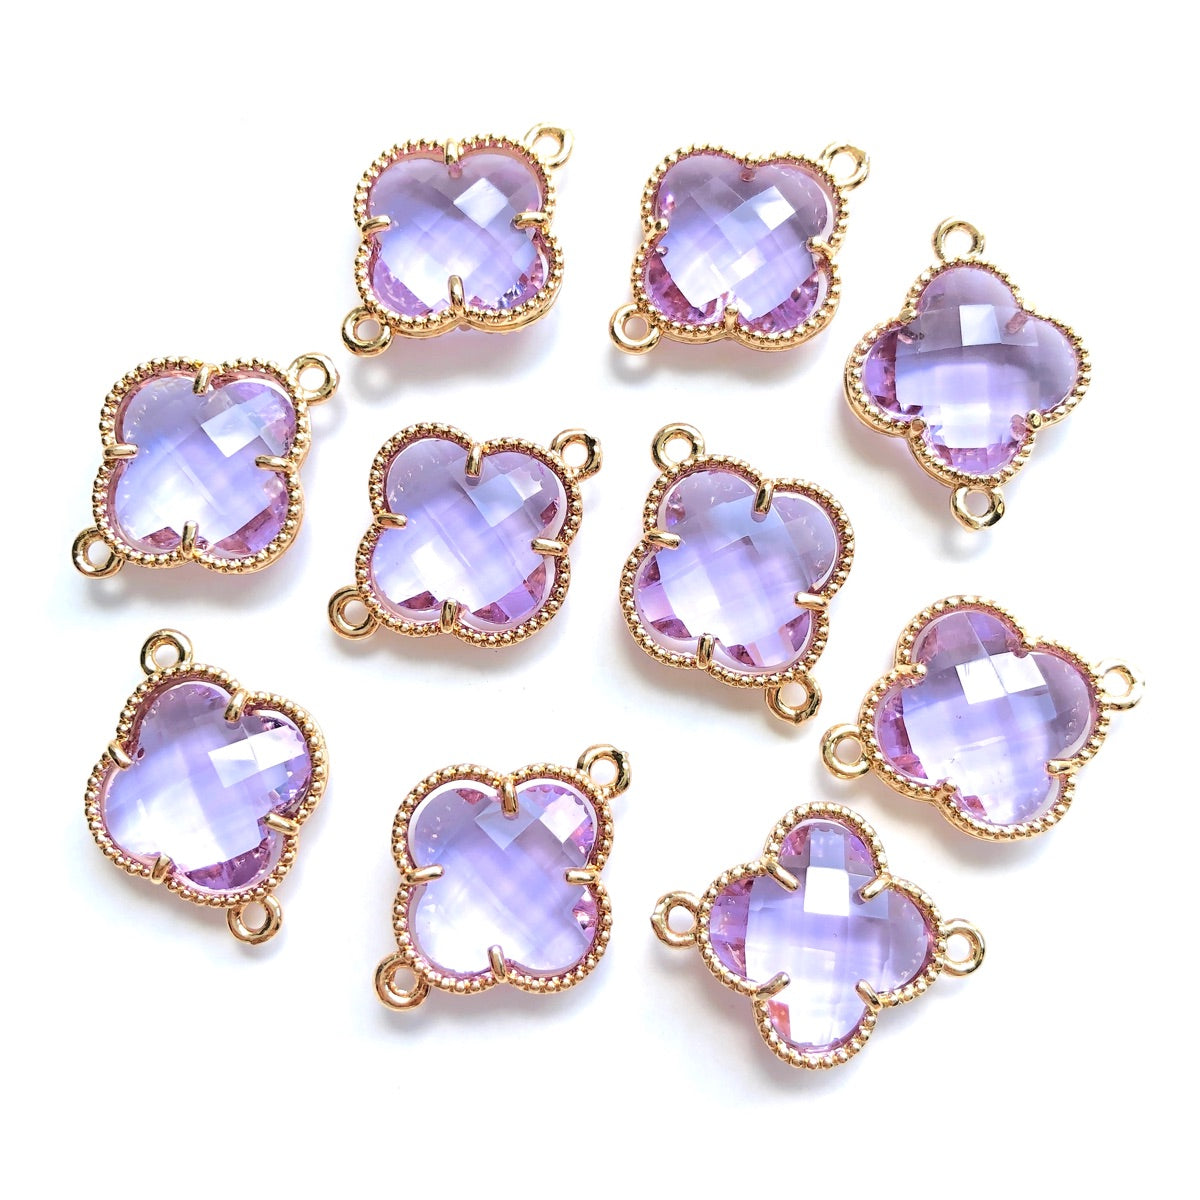 10pcs/Lot Gold Plated Glass Crystal Clover Flower Connectors Light Purple Stone Charms Flower Glass Beads New Charms Arrivals Charms Beads Beyond